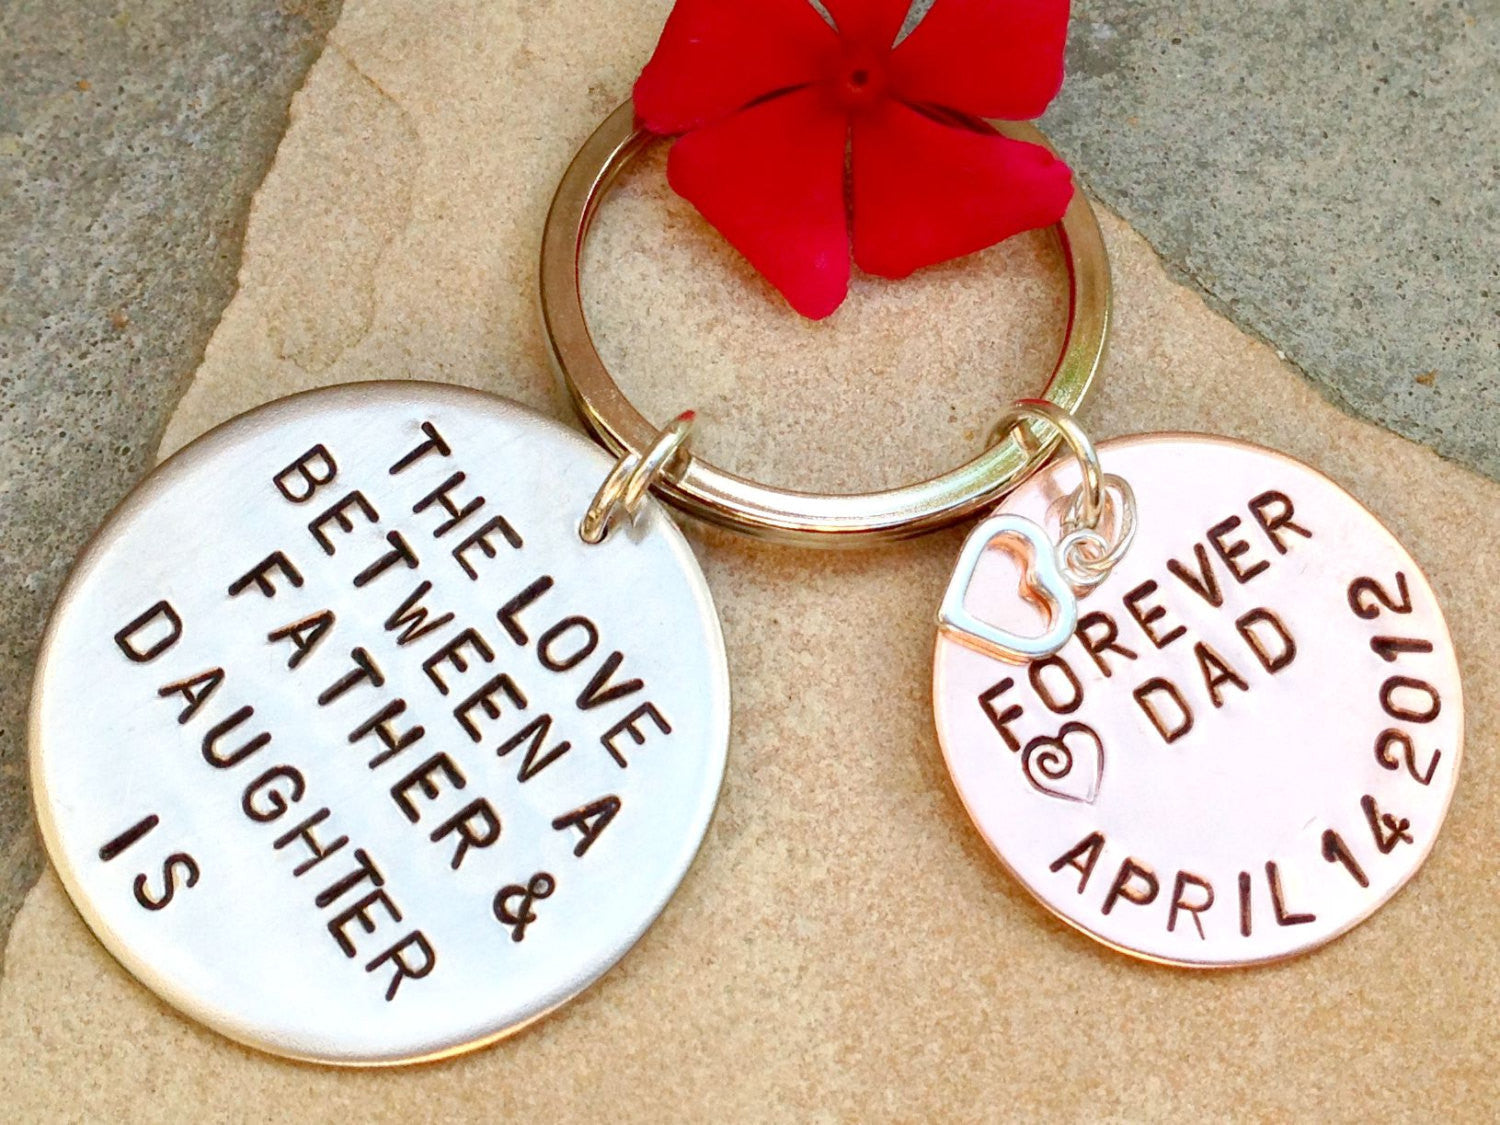 the love between a father and daughter is forever, Personalized Keychains, father daughter,gifts from dad, gifts to daughter,alohanatasha - Natashaaloha, jewelry, bracelets, necklace, keychains, fishing lures, gifts for men, charms, personalized, 